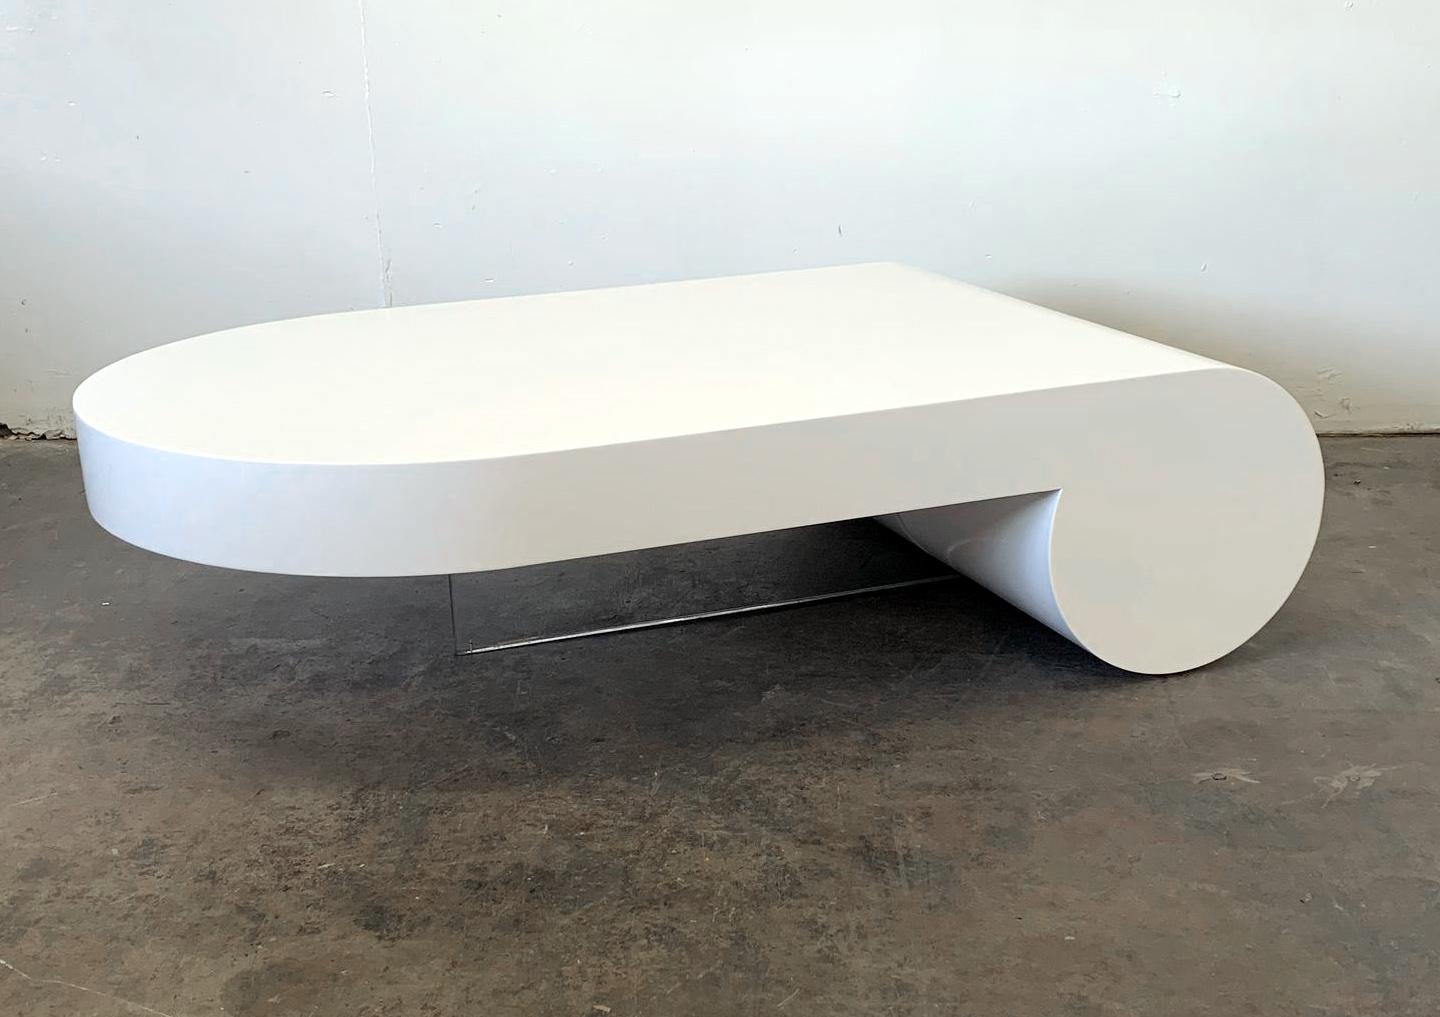 Late 20th Century Lacquered and Acrylic Postmodern Phallic Coffee Table